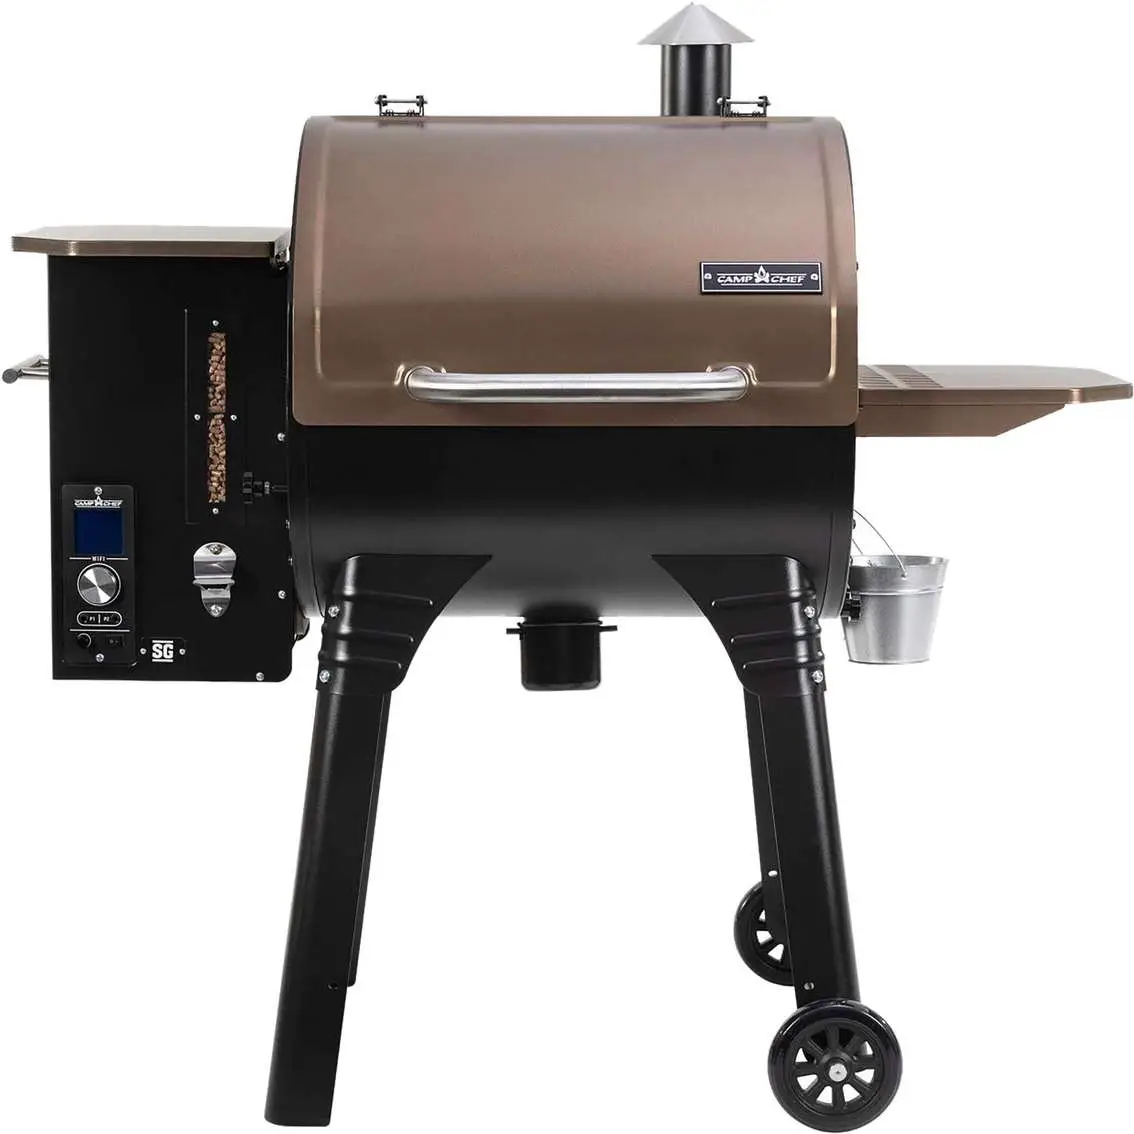 Camp Chef Smokepro Sg Wifi 24 Bronze Pellet Grill